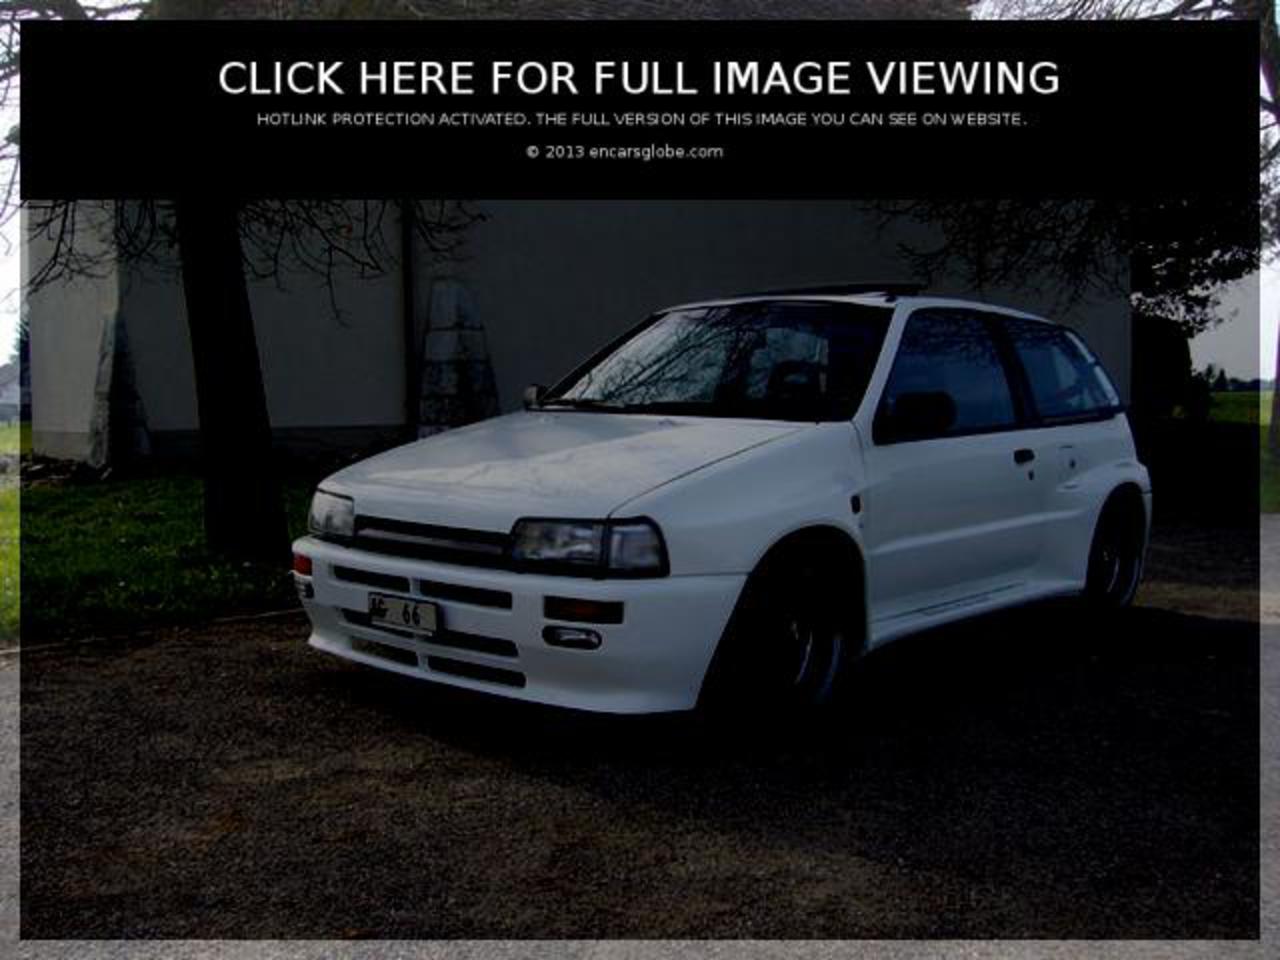 Daihatsu Charade Turbo: Photo gallery, complete information about ...